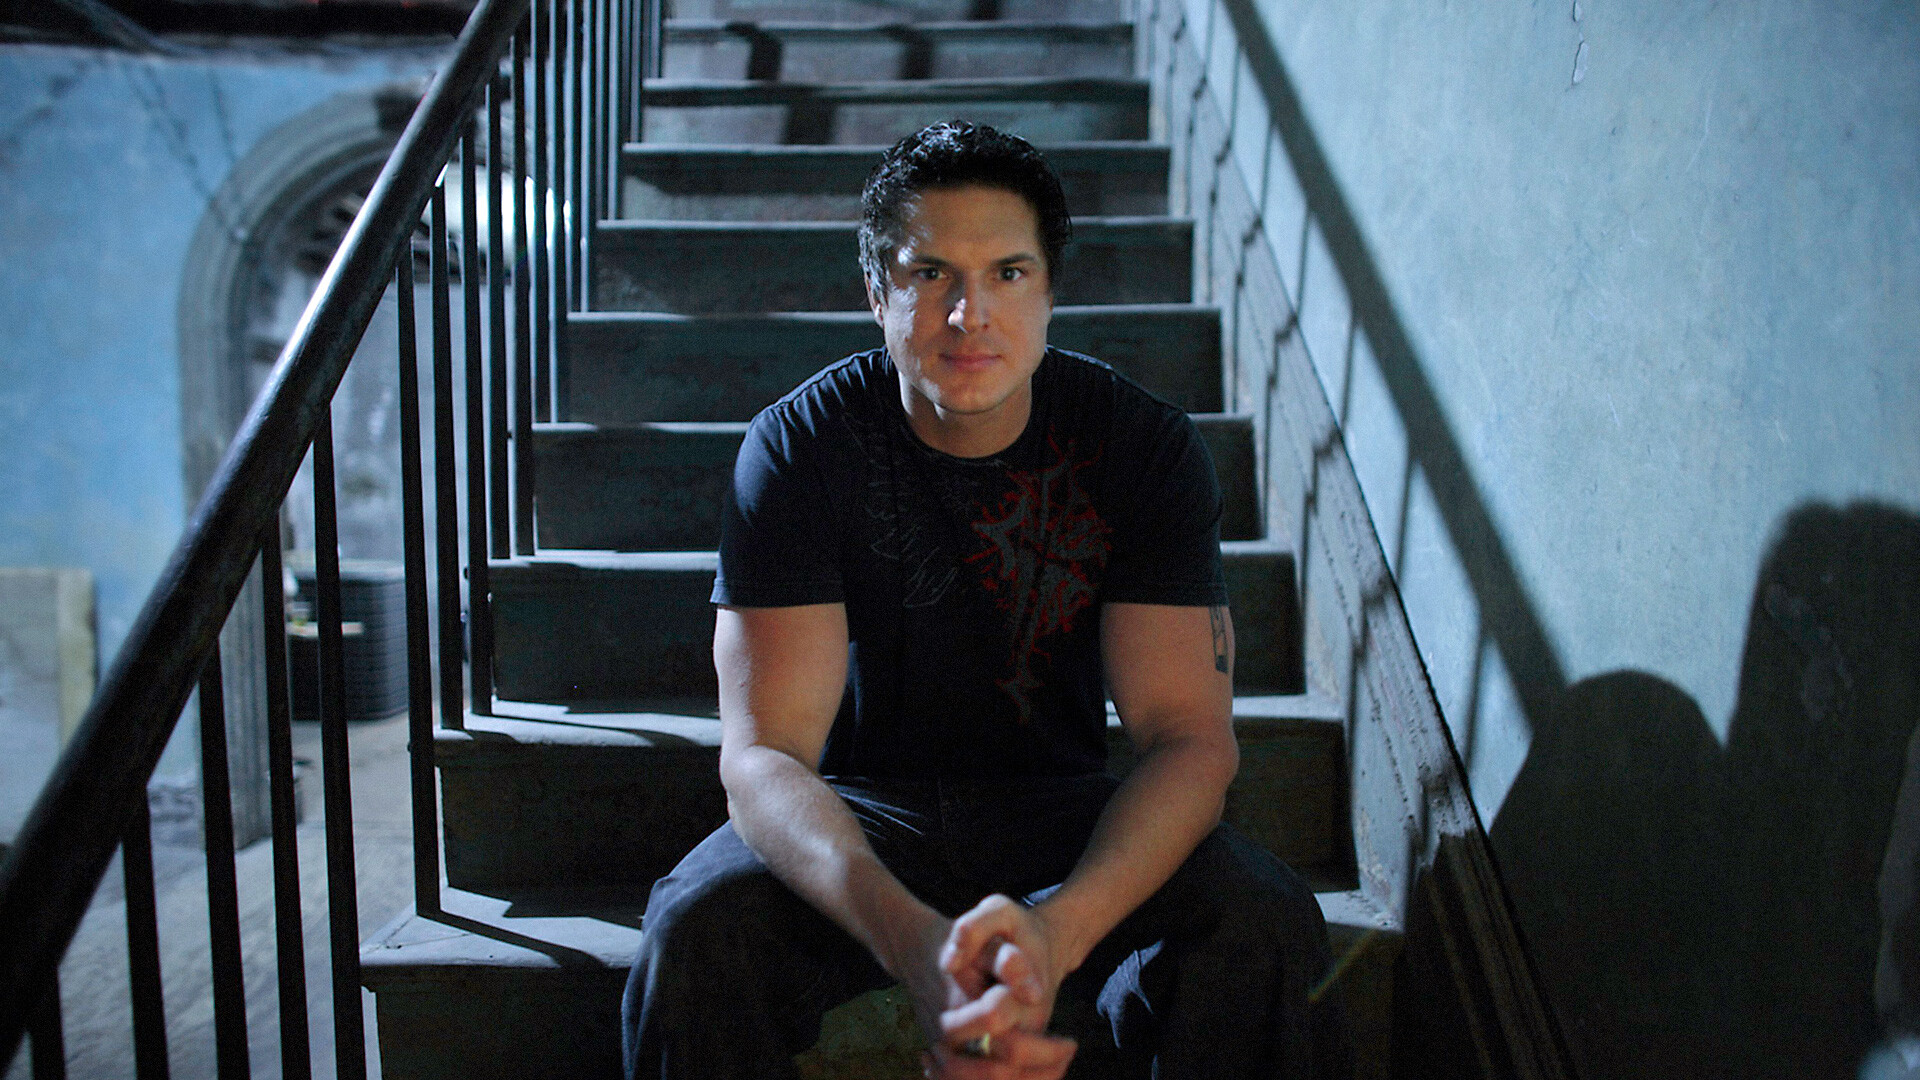 Ghost Adventures (TV Series): Zak Bagans, An American paranormal investigator, actor, television personality, museum operator, and author. 1920x1080 Full HD Background.